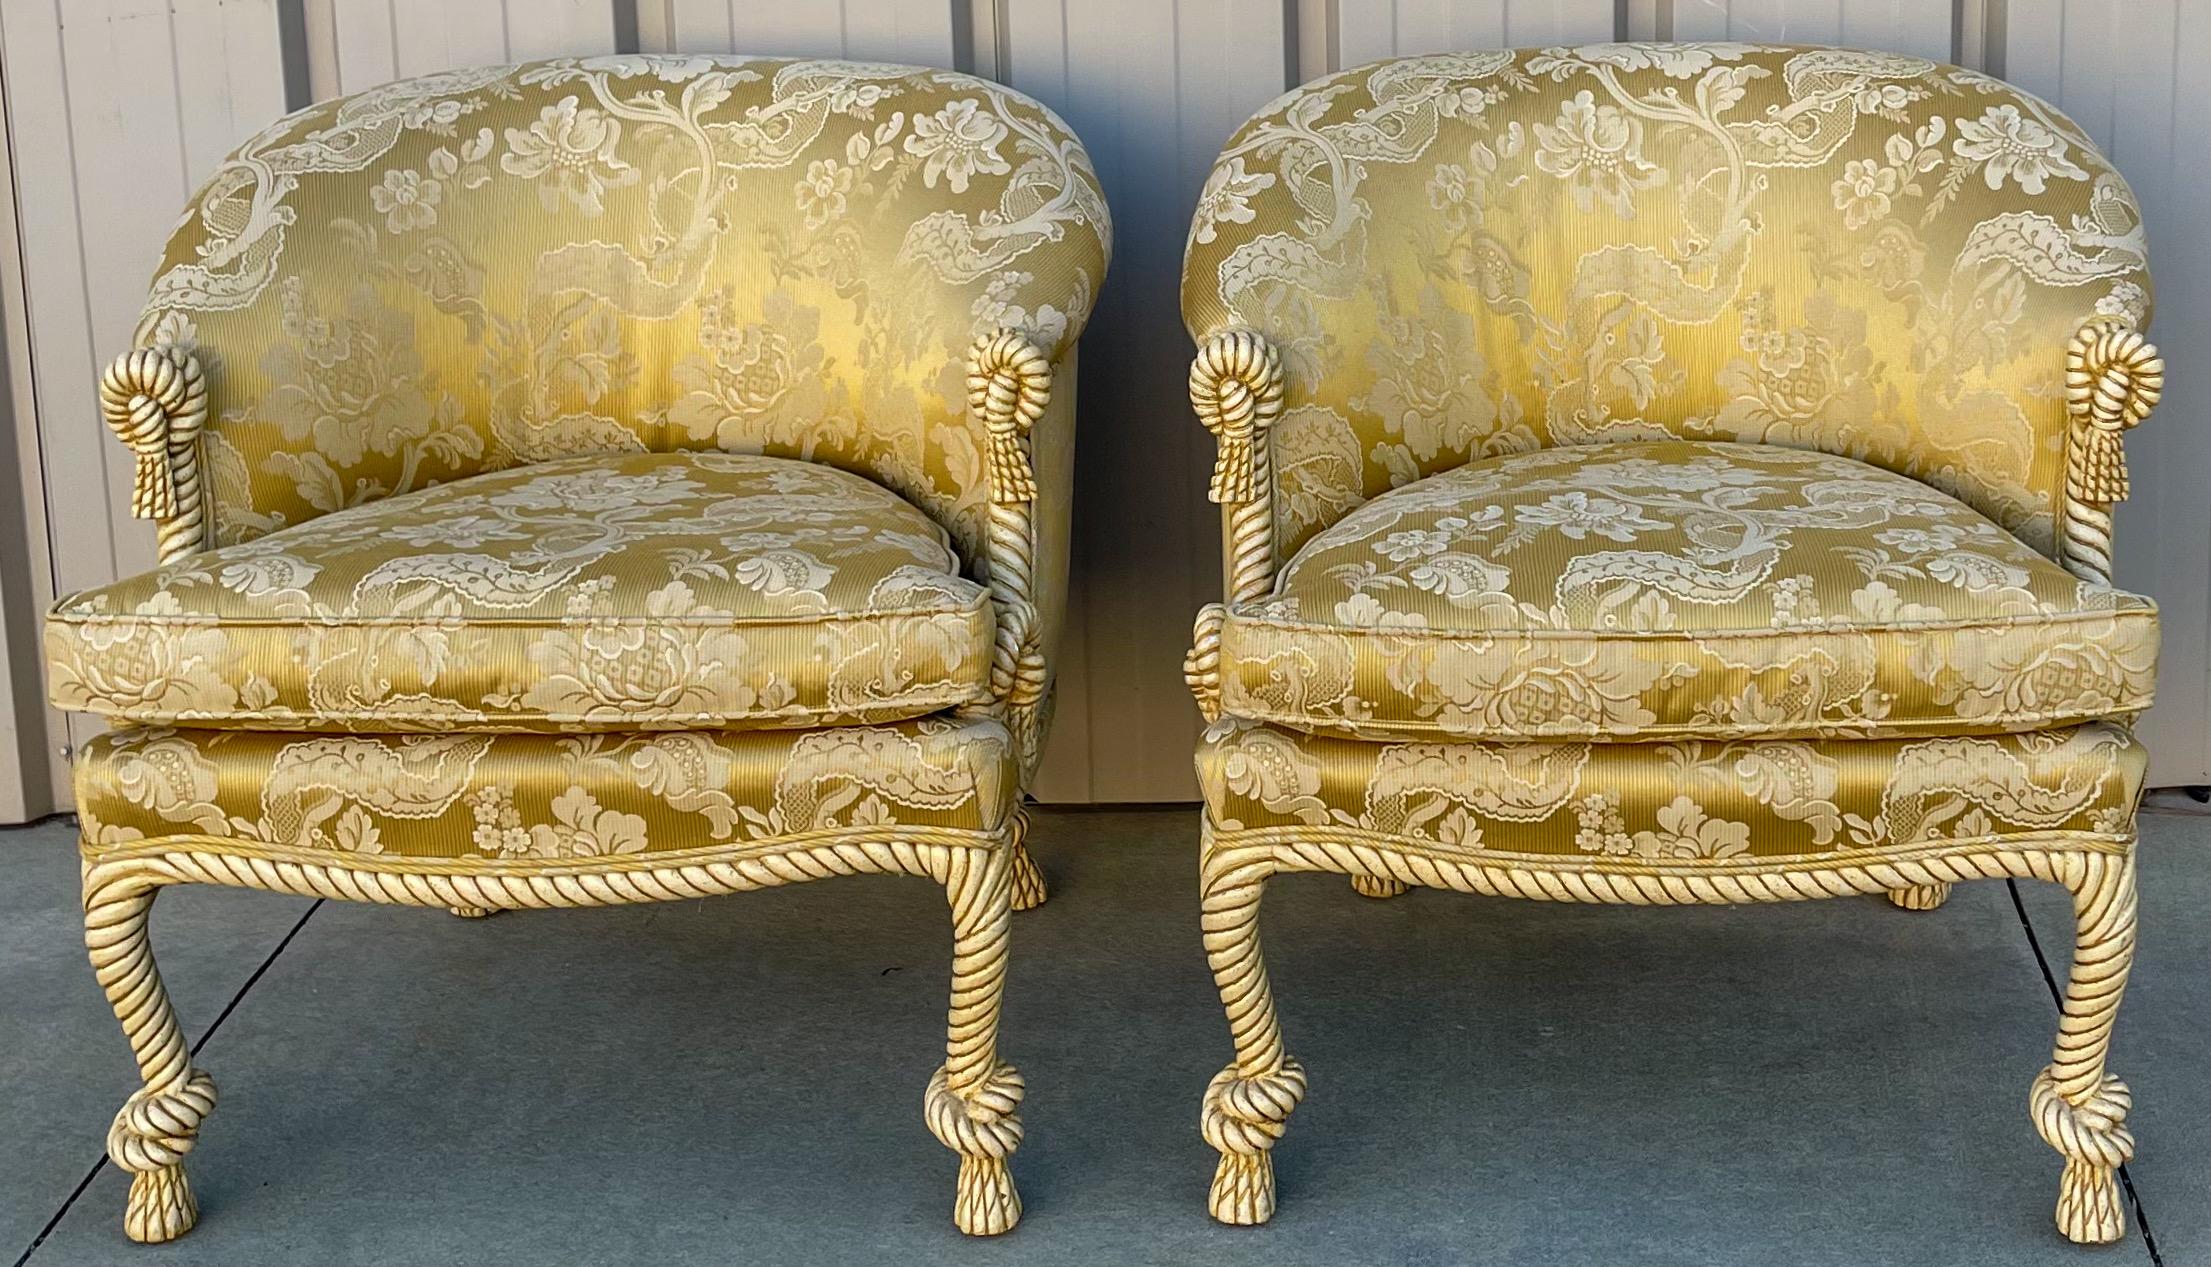 Upholstery Hollywood Regency Style Carved Rope and Tassel with Knot Club Chairs, Pair